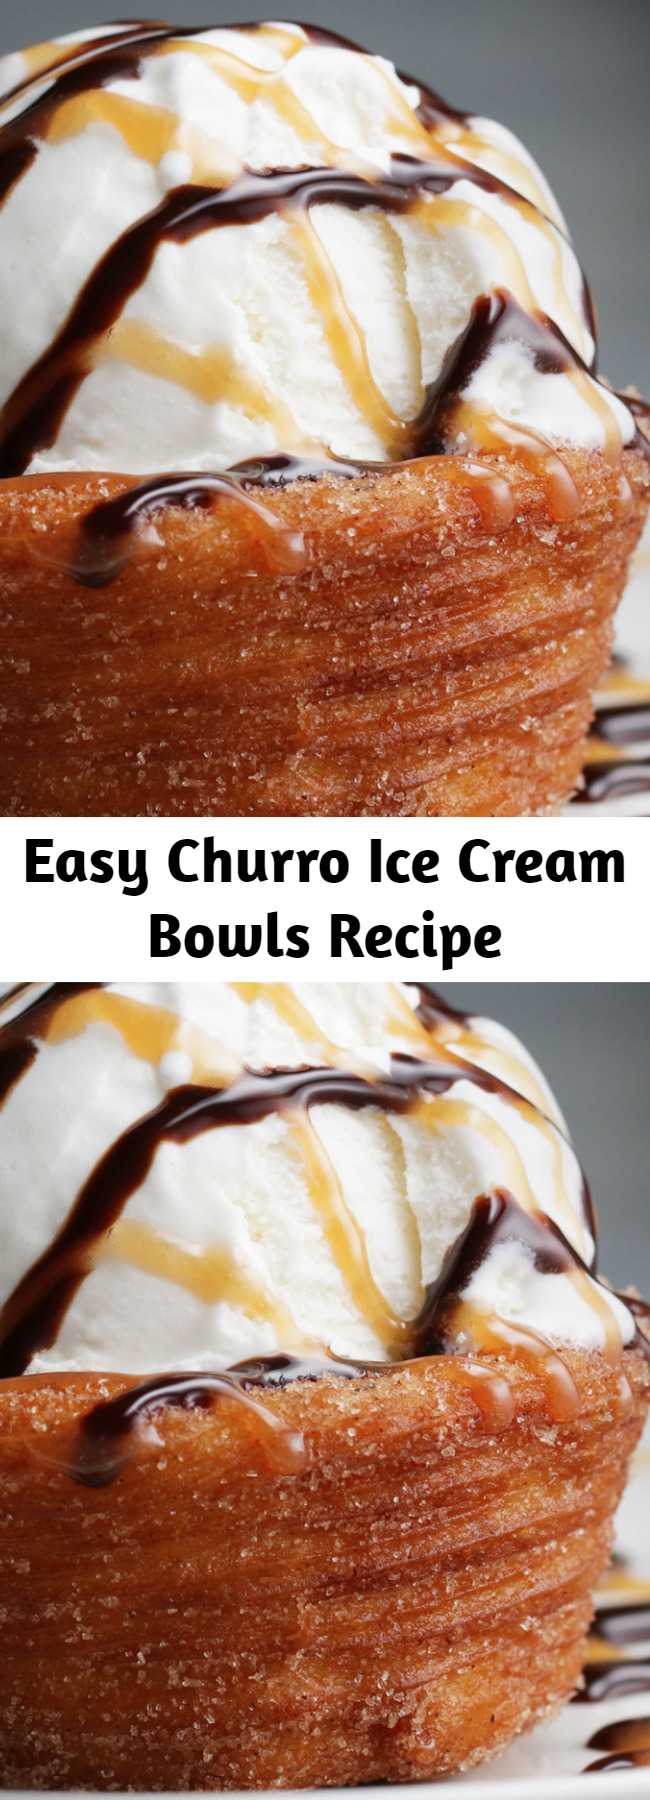 Easy Churro Ice Cream Bowls Recipe - Add a lot of cooking spray to the pan! Also make sure the churro dough is completely frozen! This was so good! Try it with horchata ice cream 🍨😋